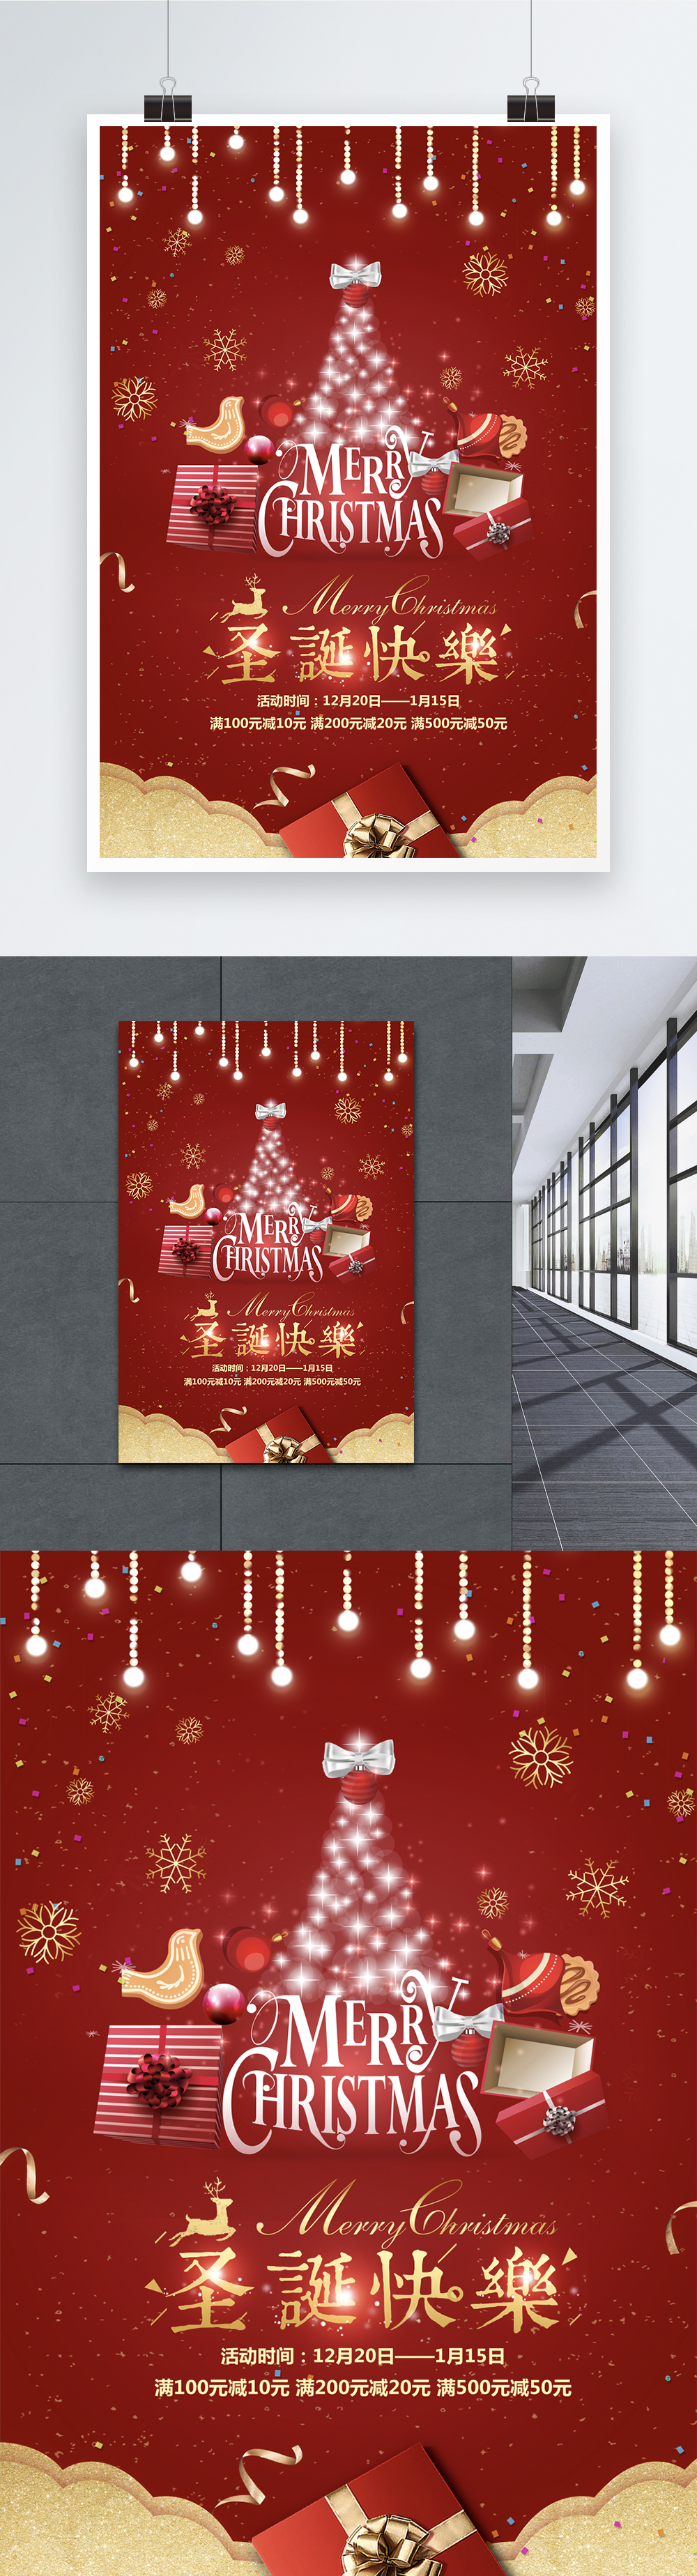 Download Red Creative Christmas Poster Template Image Picture Free Download 400935326 Lovepik Com SVG Cut Files